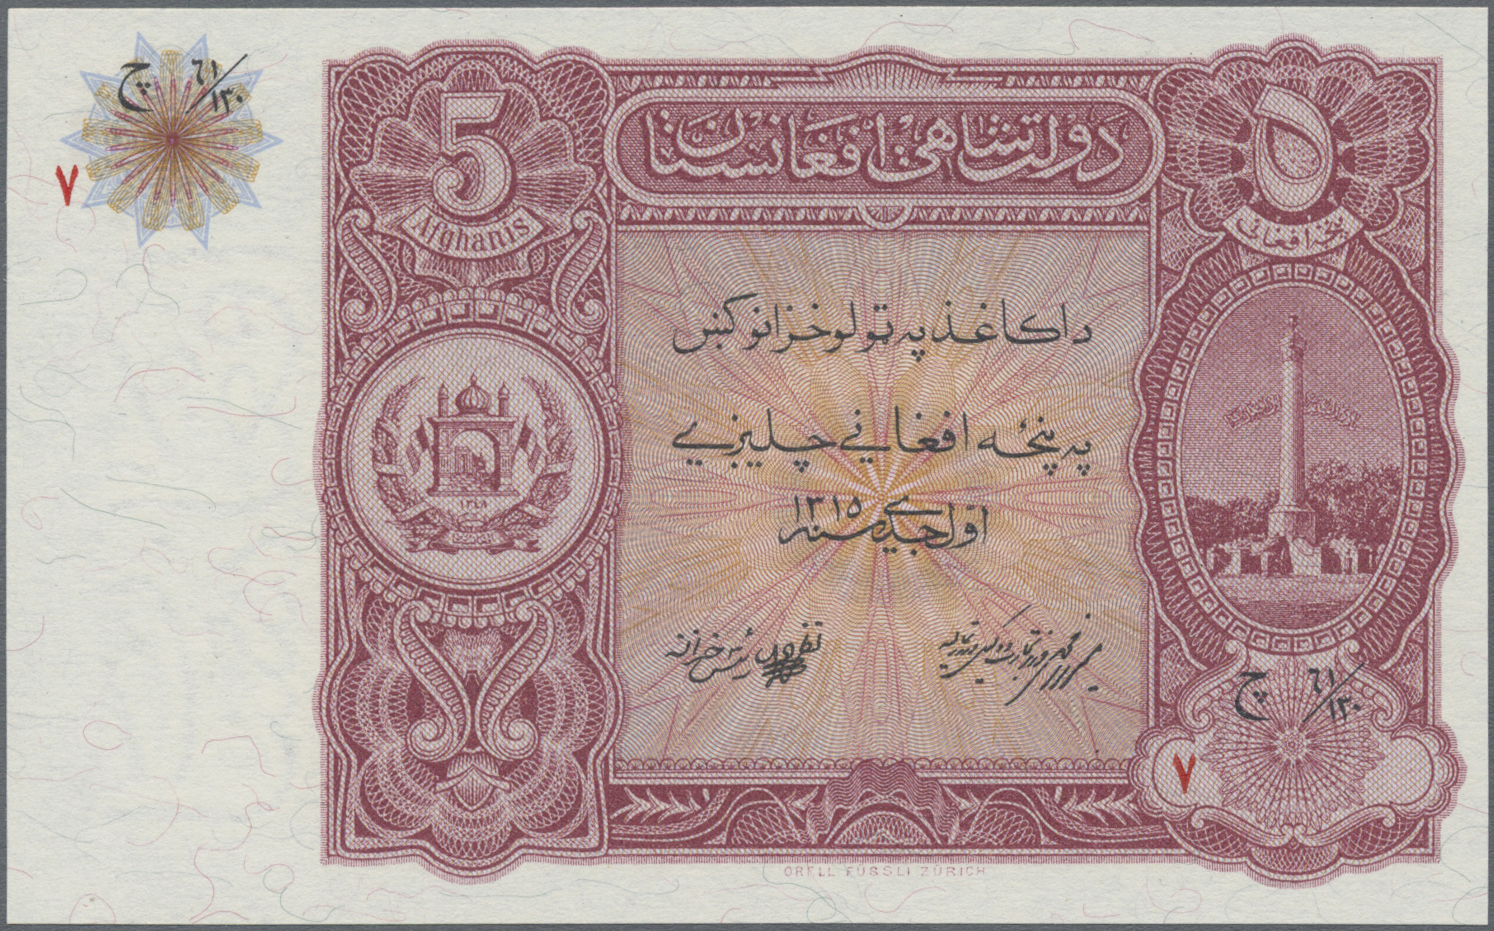 Lot 00002 - Afghanistan | Banknoten  -  Auktionshaus Christoph Gärtner GmbH & Co. KG 55th AUCTION - Day 1